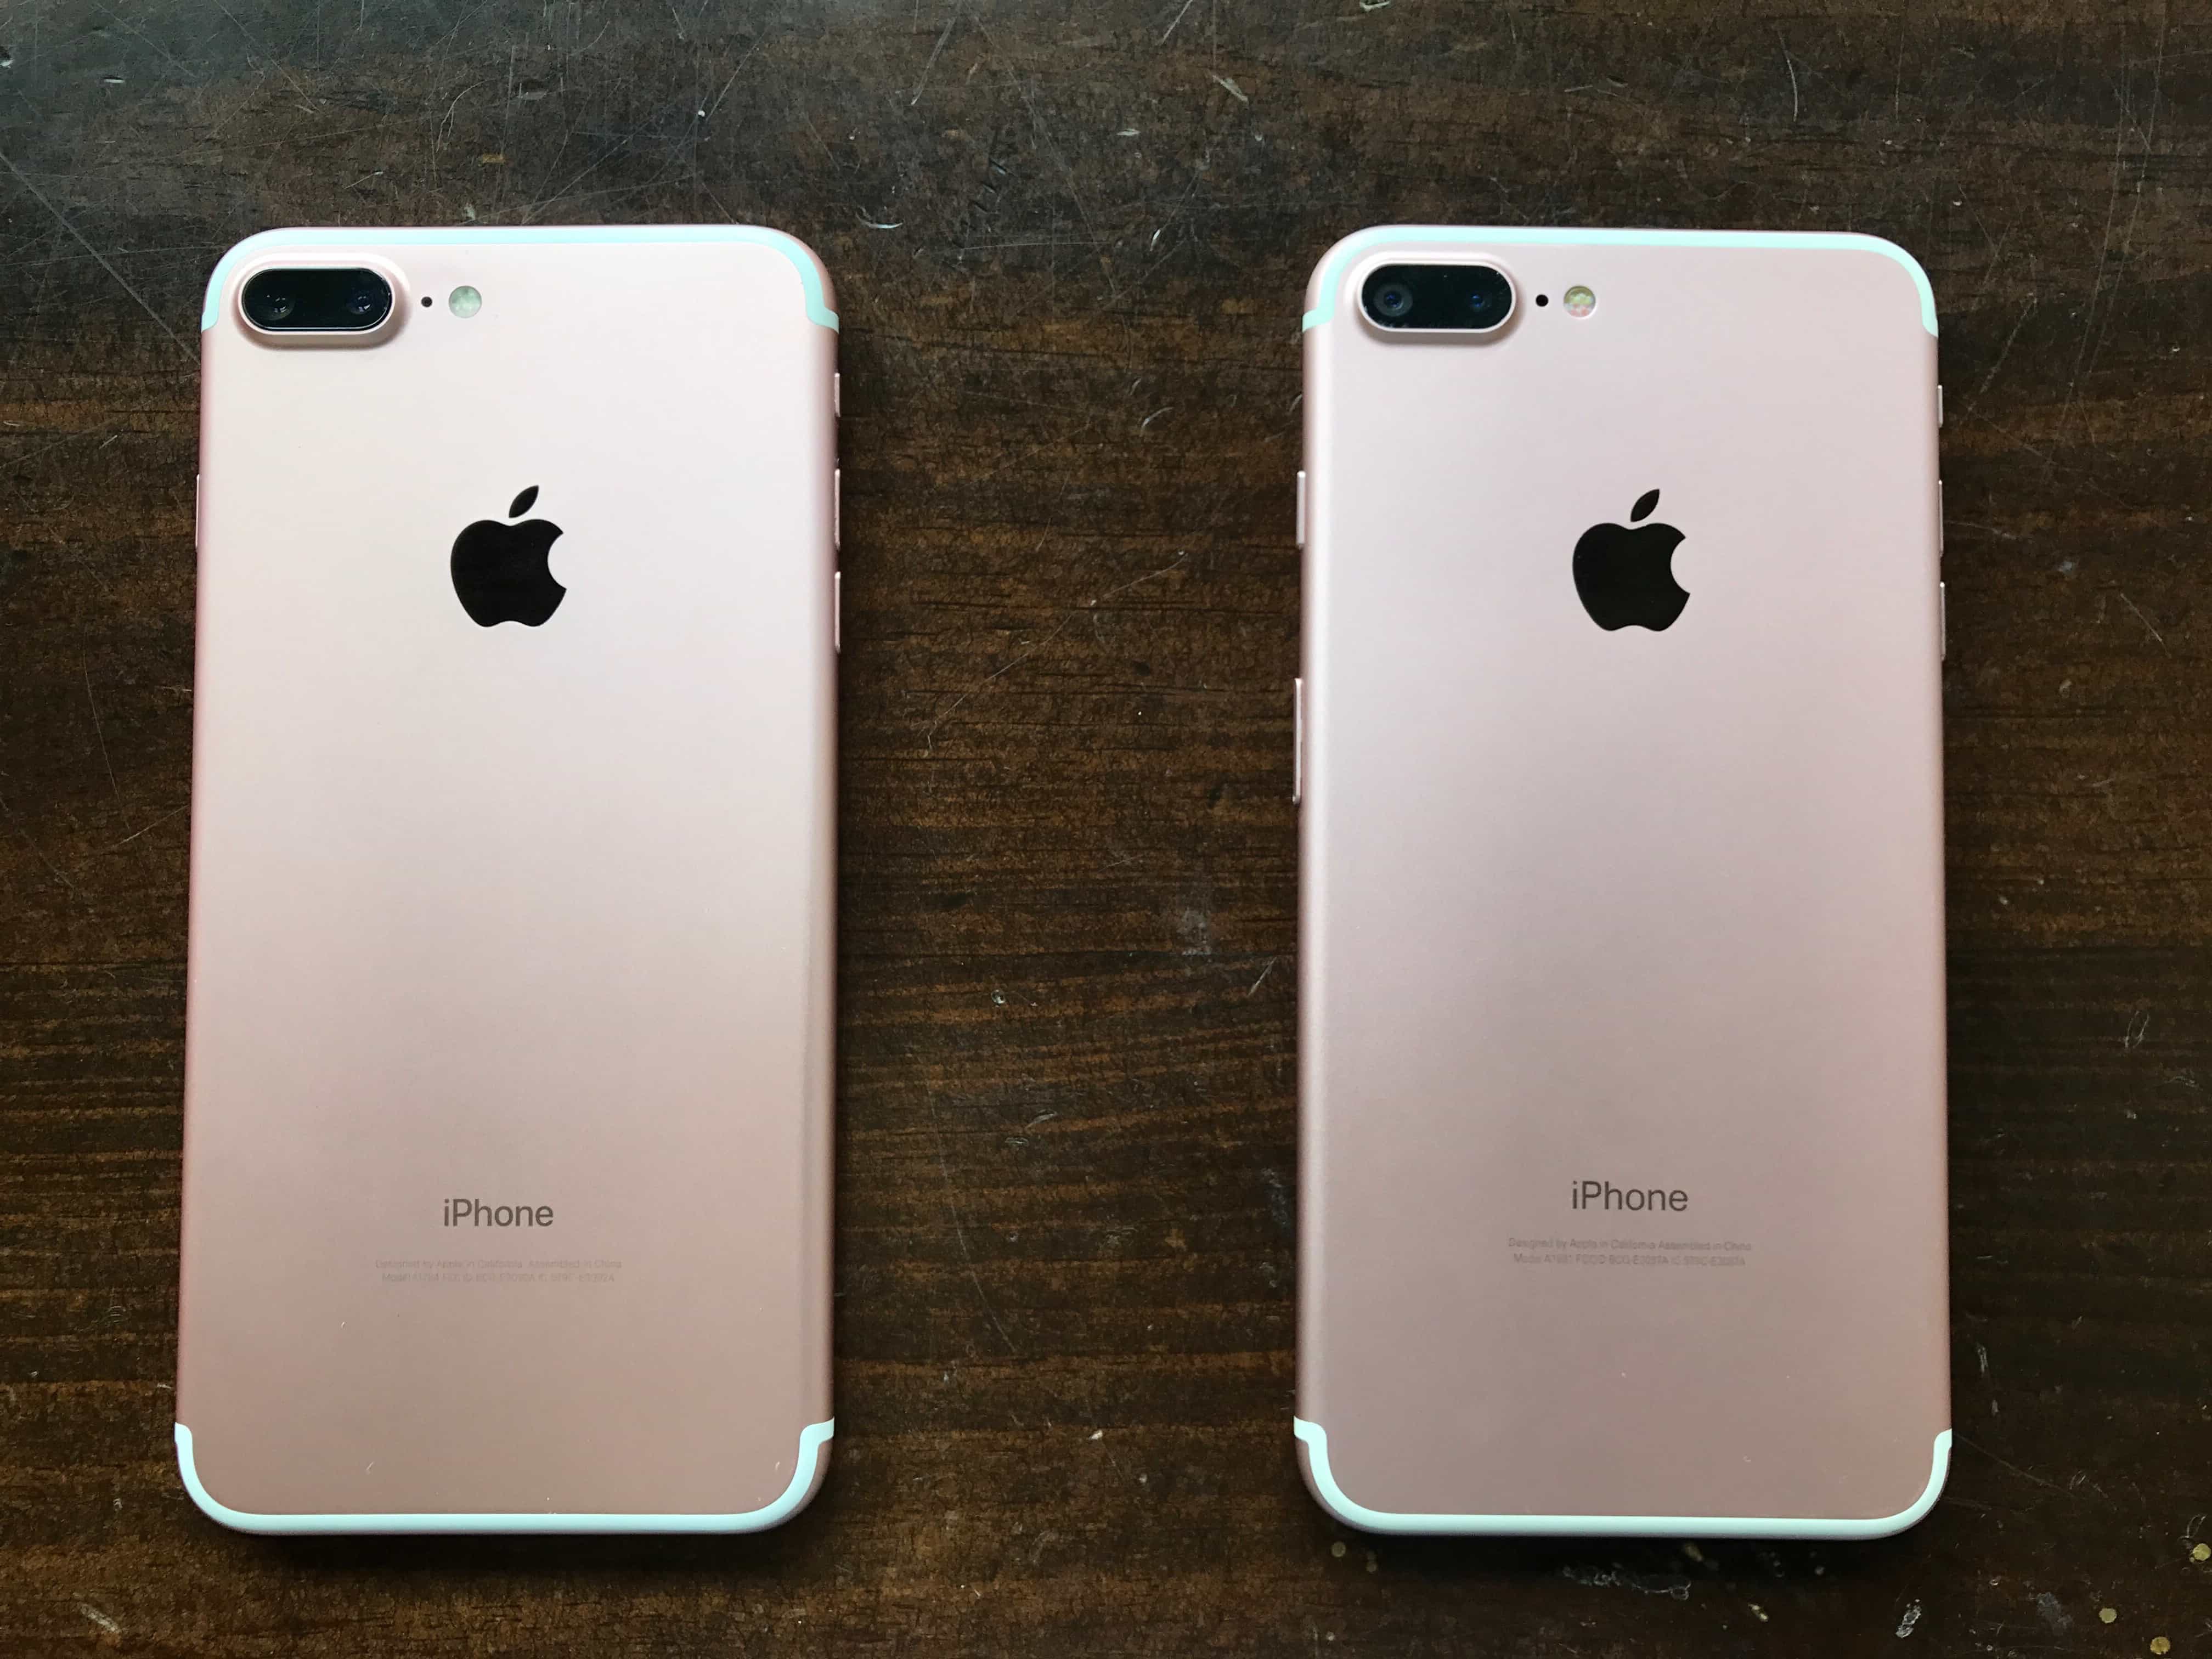 From the back, the fake iPhone looks just like the real thing. (The fake phone is on the right.)